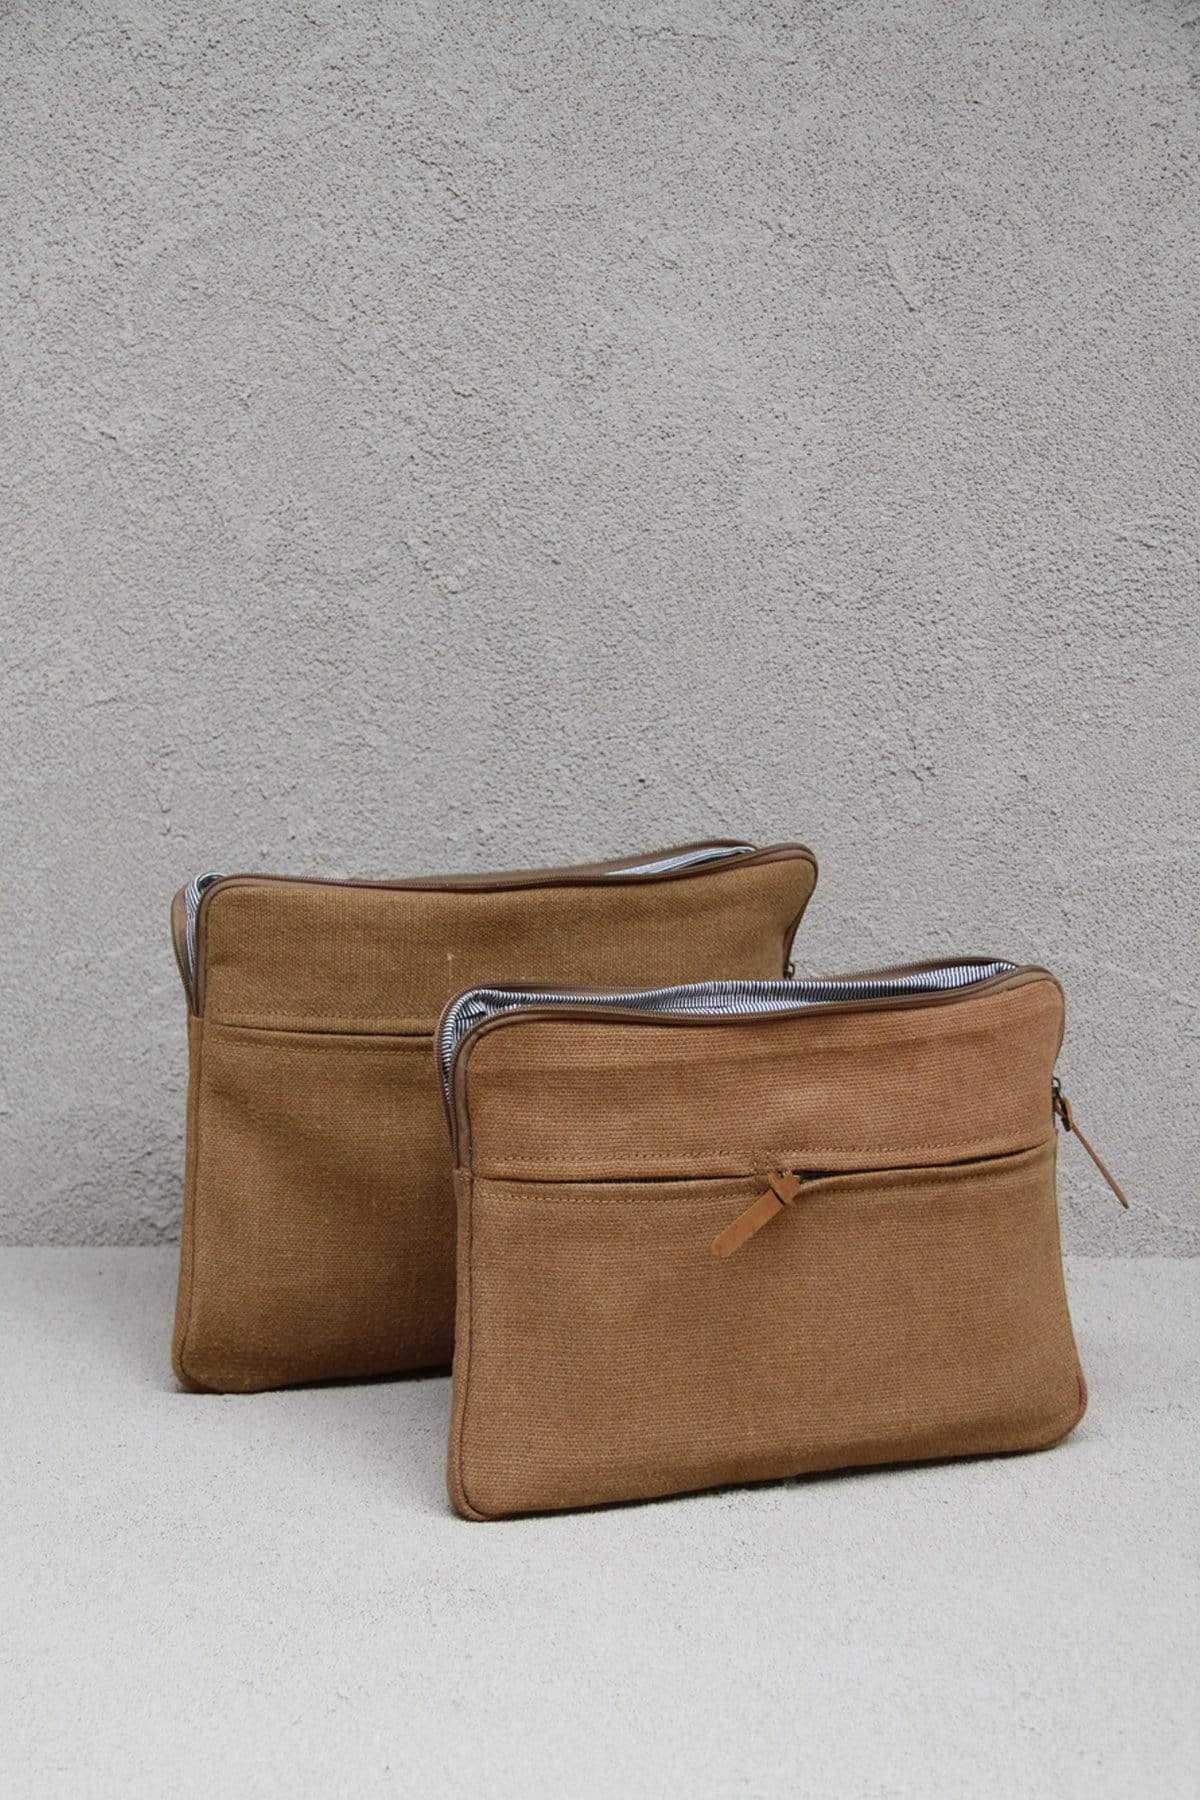 The Dharma Door Bags and Totes Laptop/iPad Bag - Camel